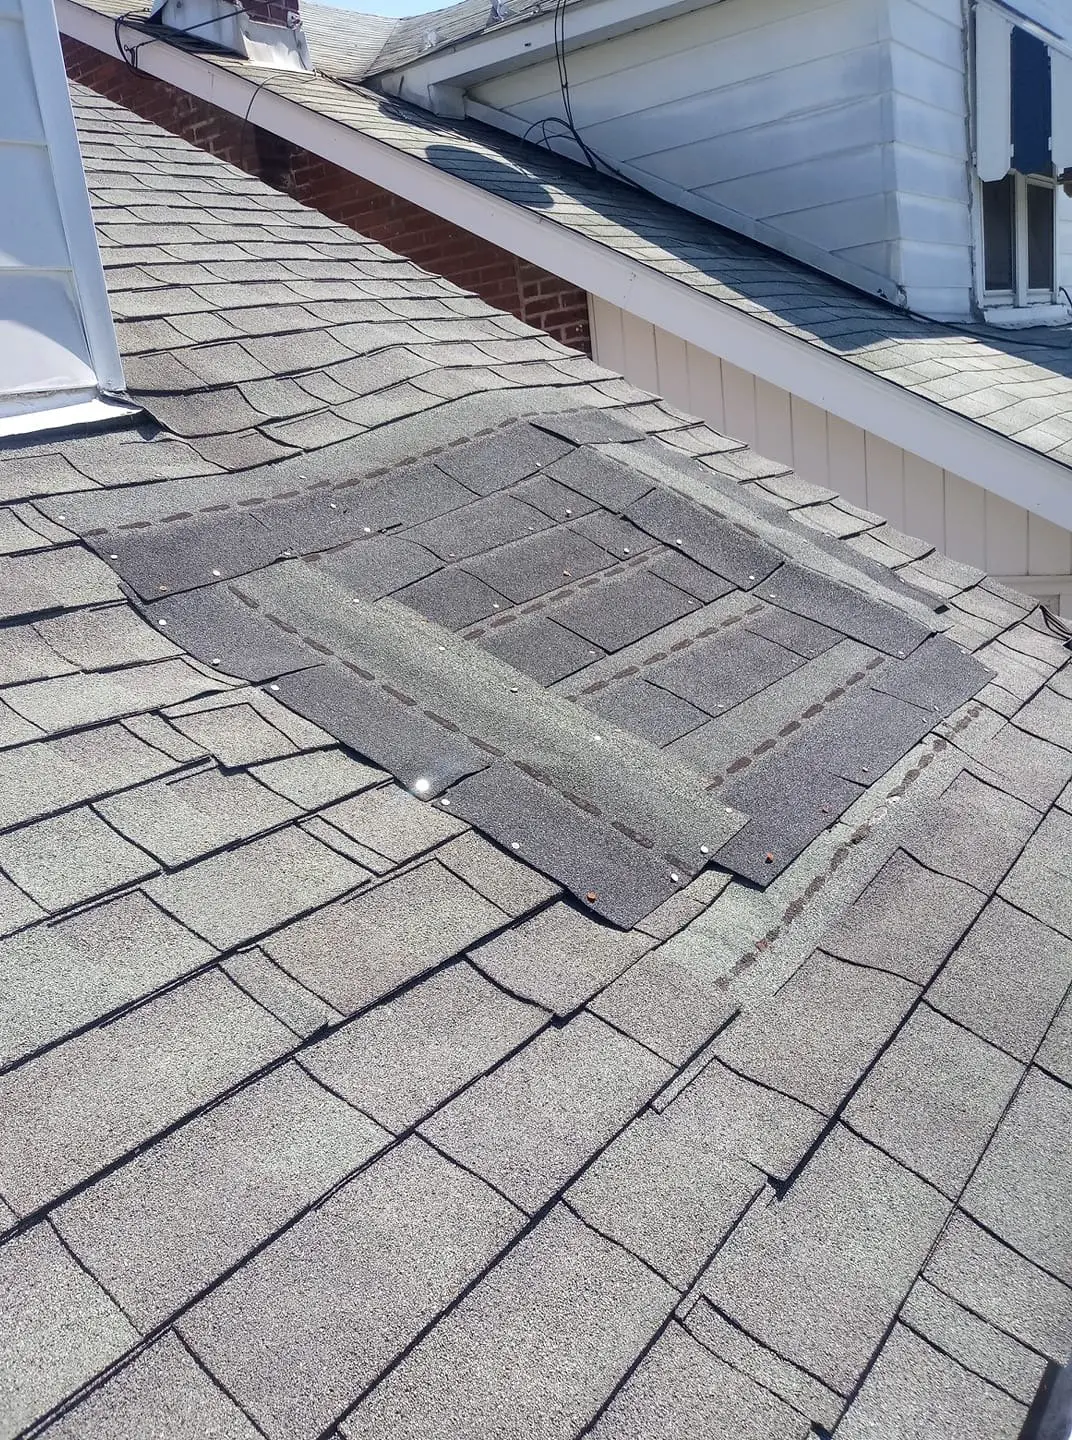 Cheap Roofers. Are they worth the savings?